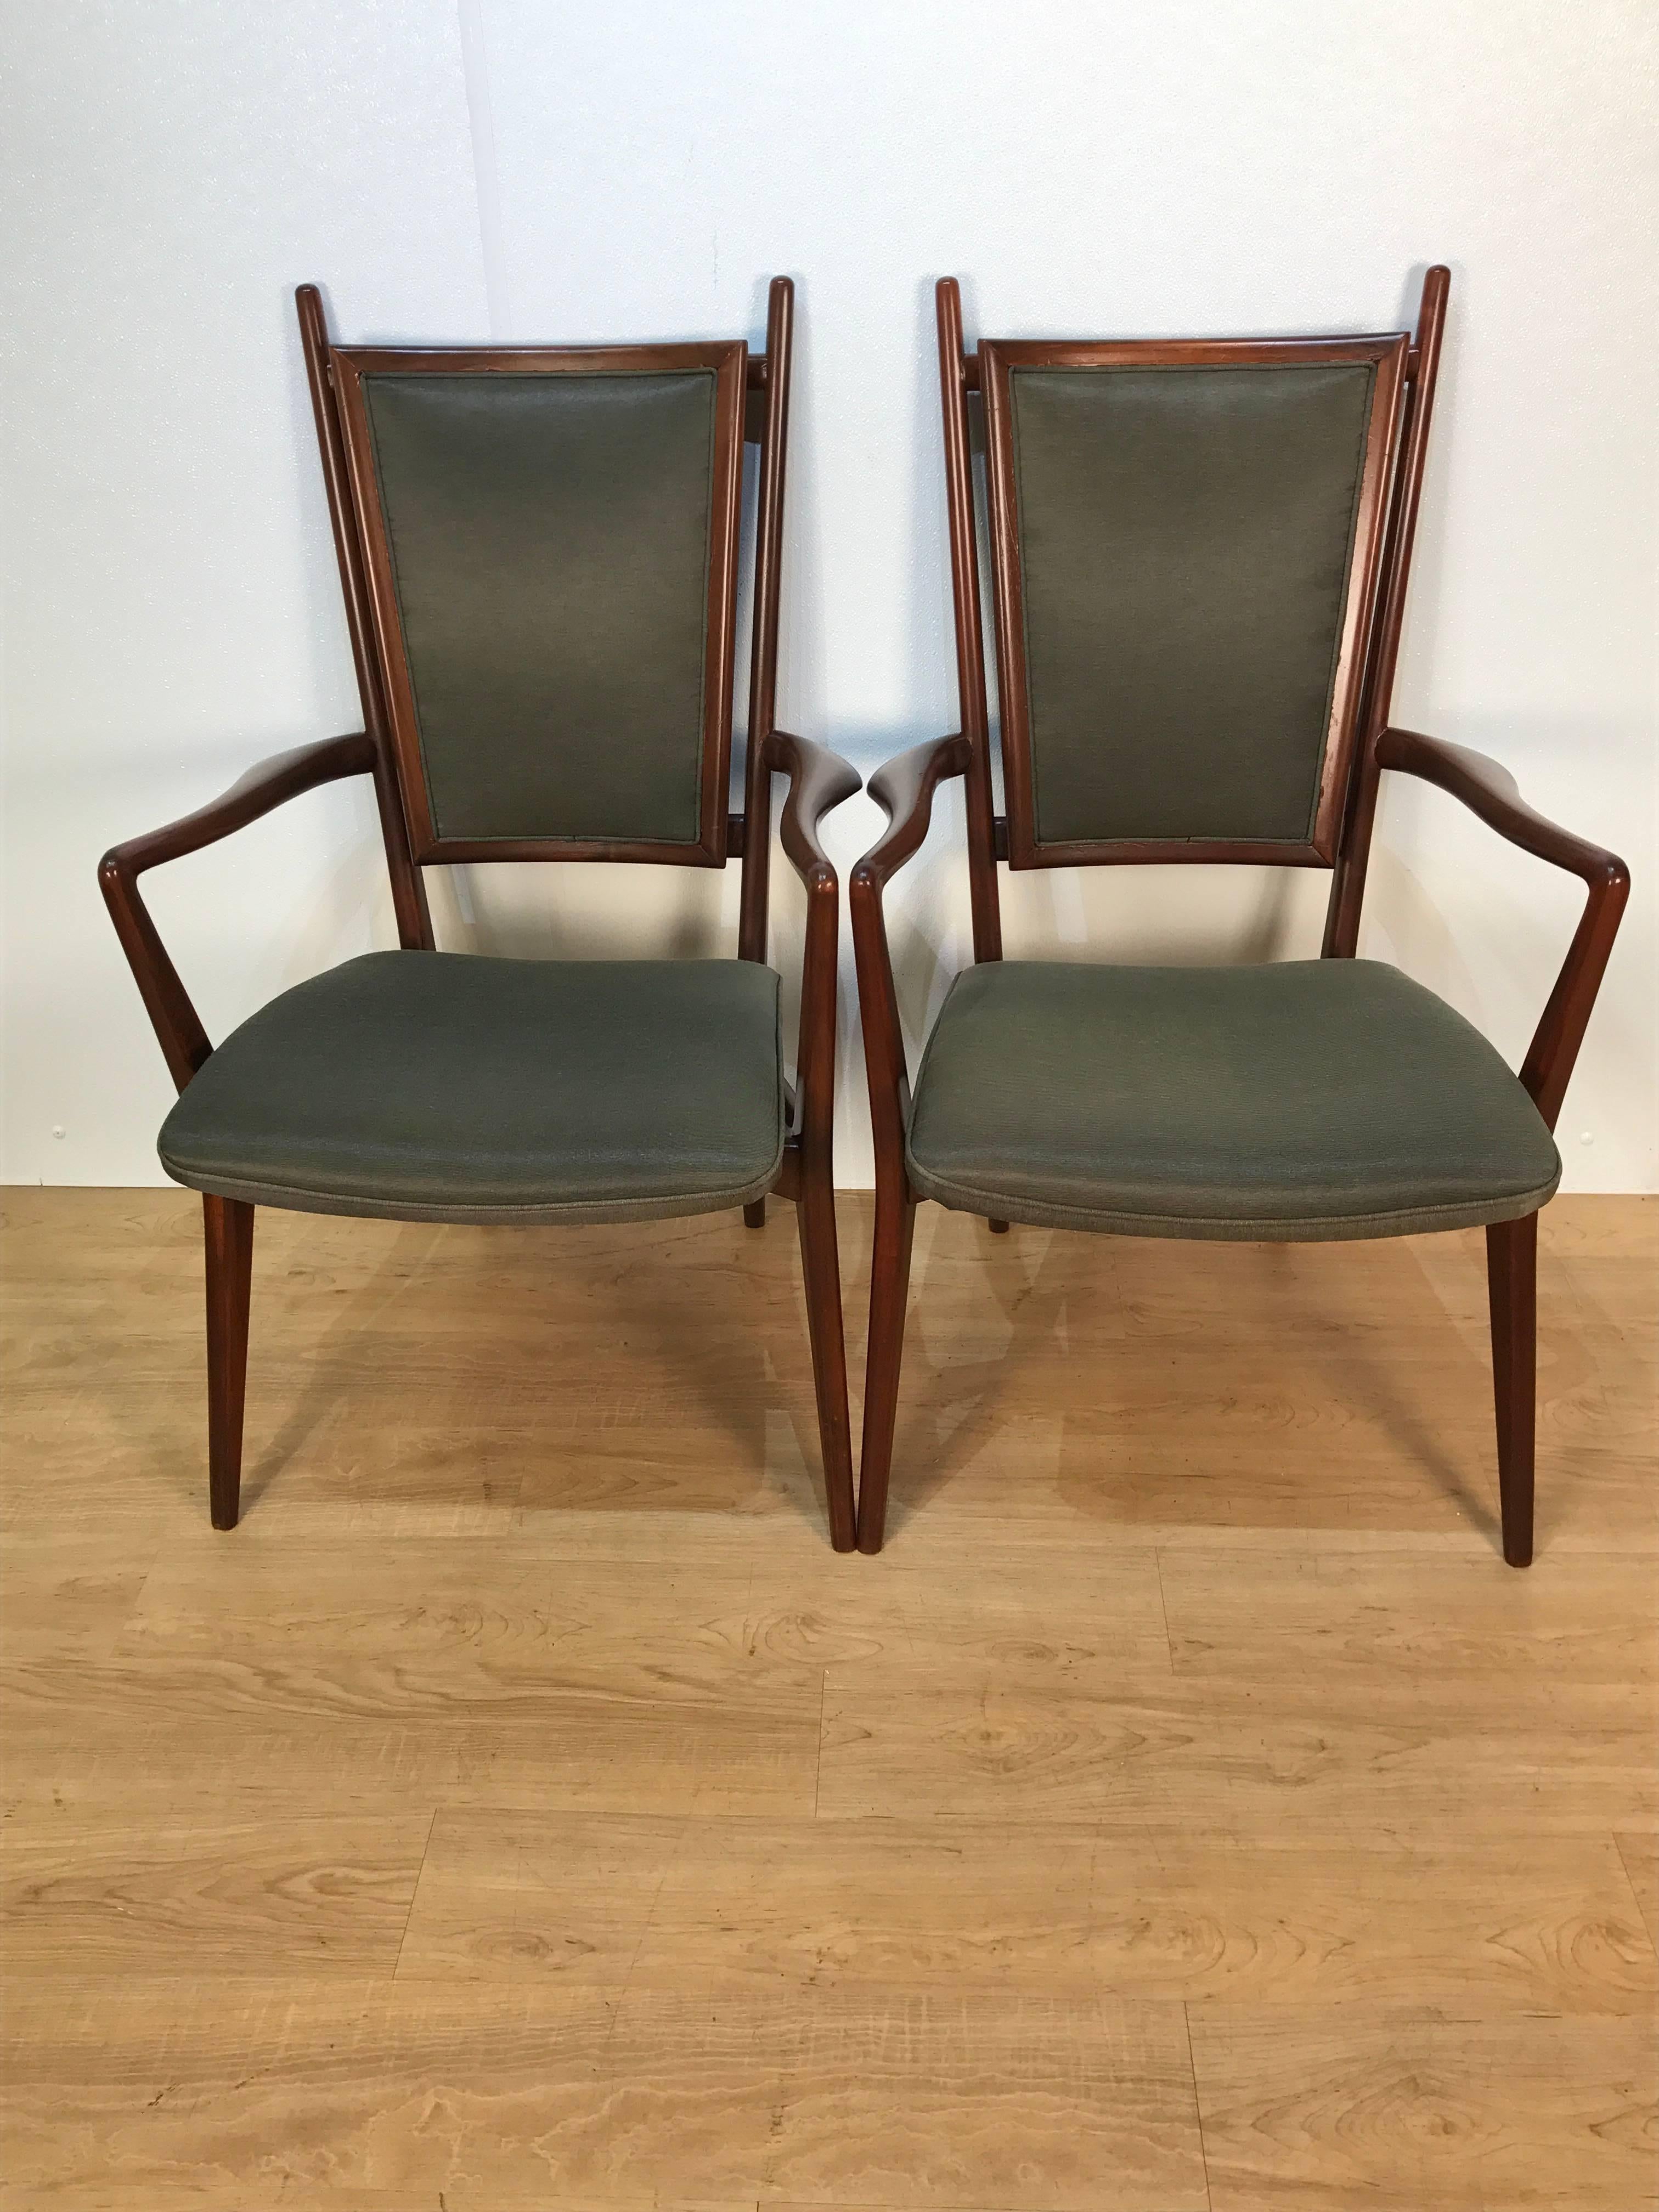 Four Vladimir Kagan dining chairs, by Grosfeld House consisting of two-arm and two side chairs, newly upholstered.
Illustrated with cane seat backs in The Complete Kagan, Tom Ford pages 108 & 109.

Measures: Armchairs: 39.5 in H x 24 in W x 24 in